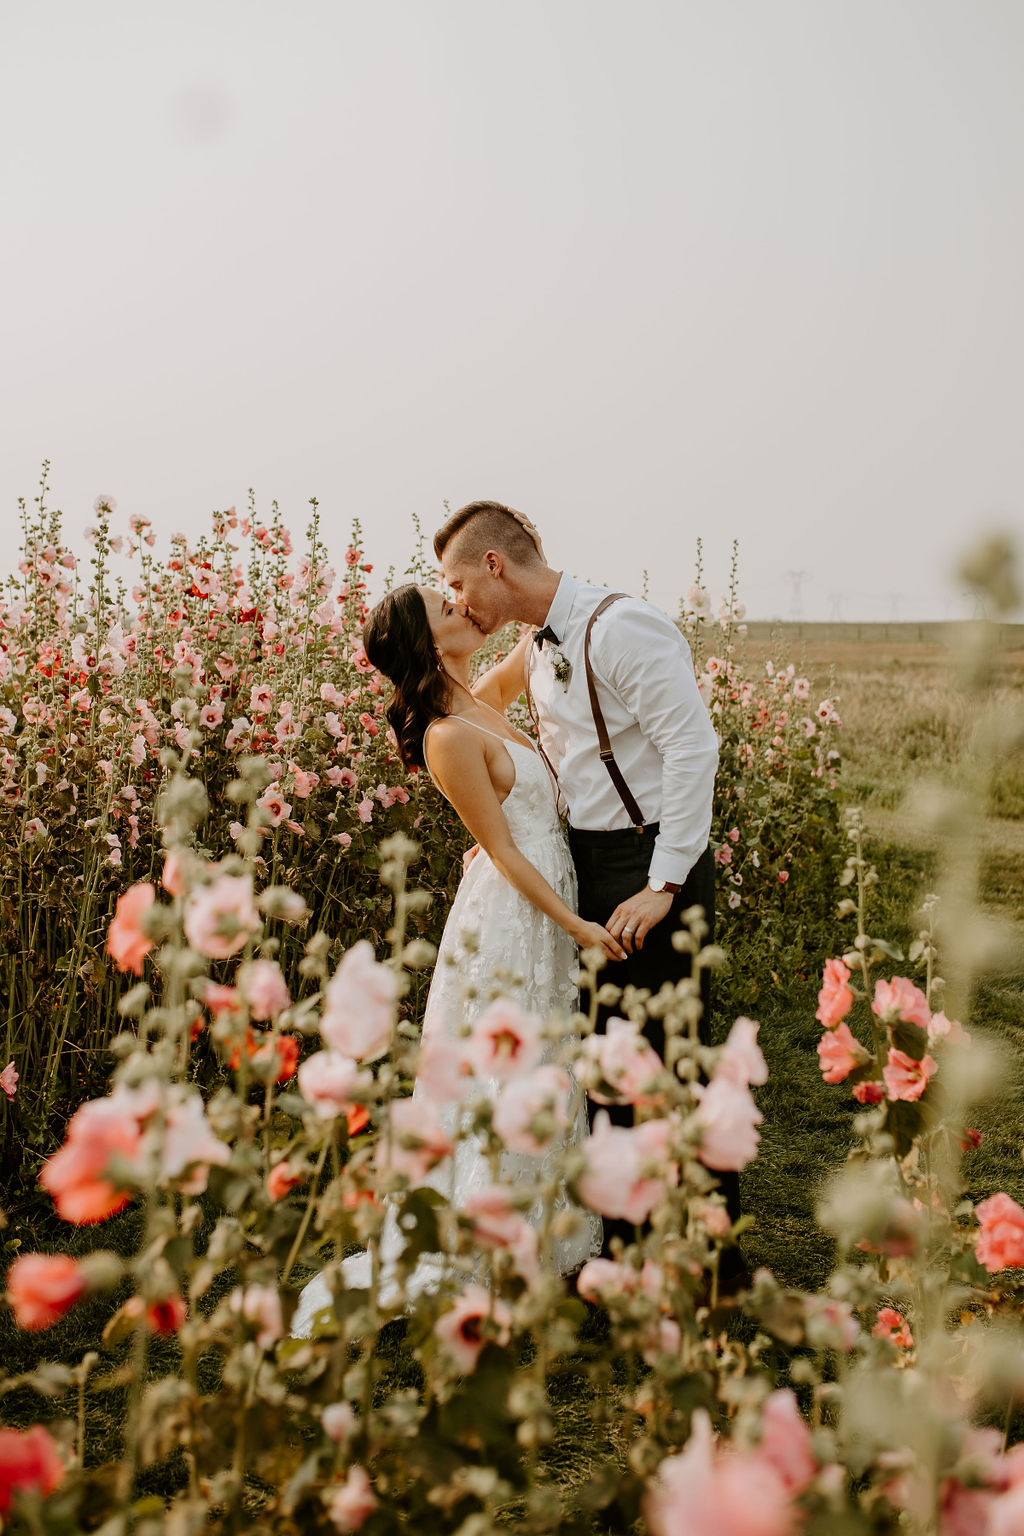 A bride and groom sharing a tender kiss in a field of pink hollyhocks, with a warm breeze gently caressing their faces.